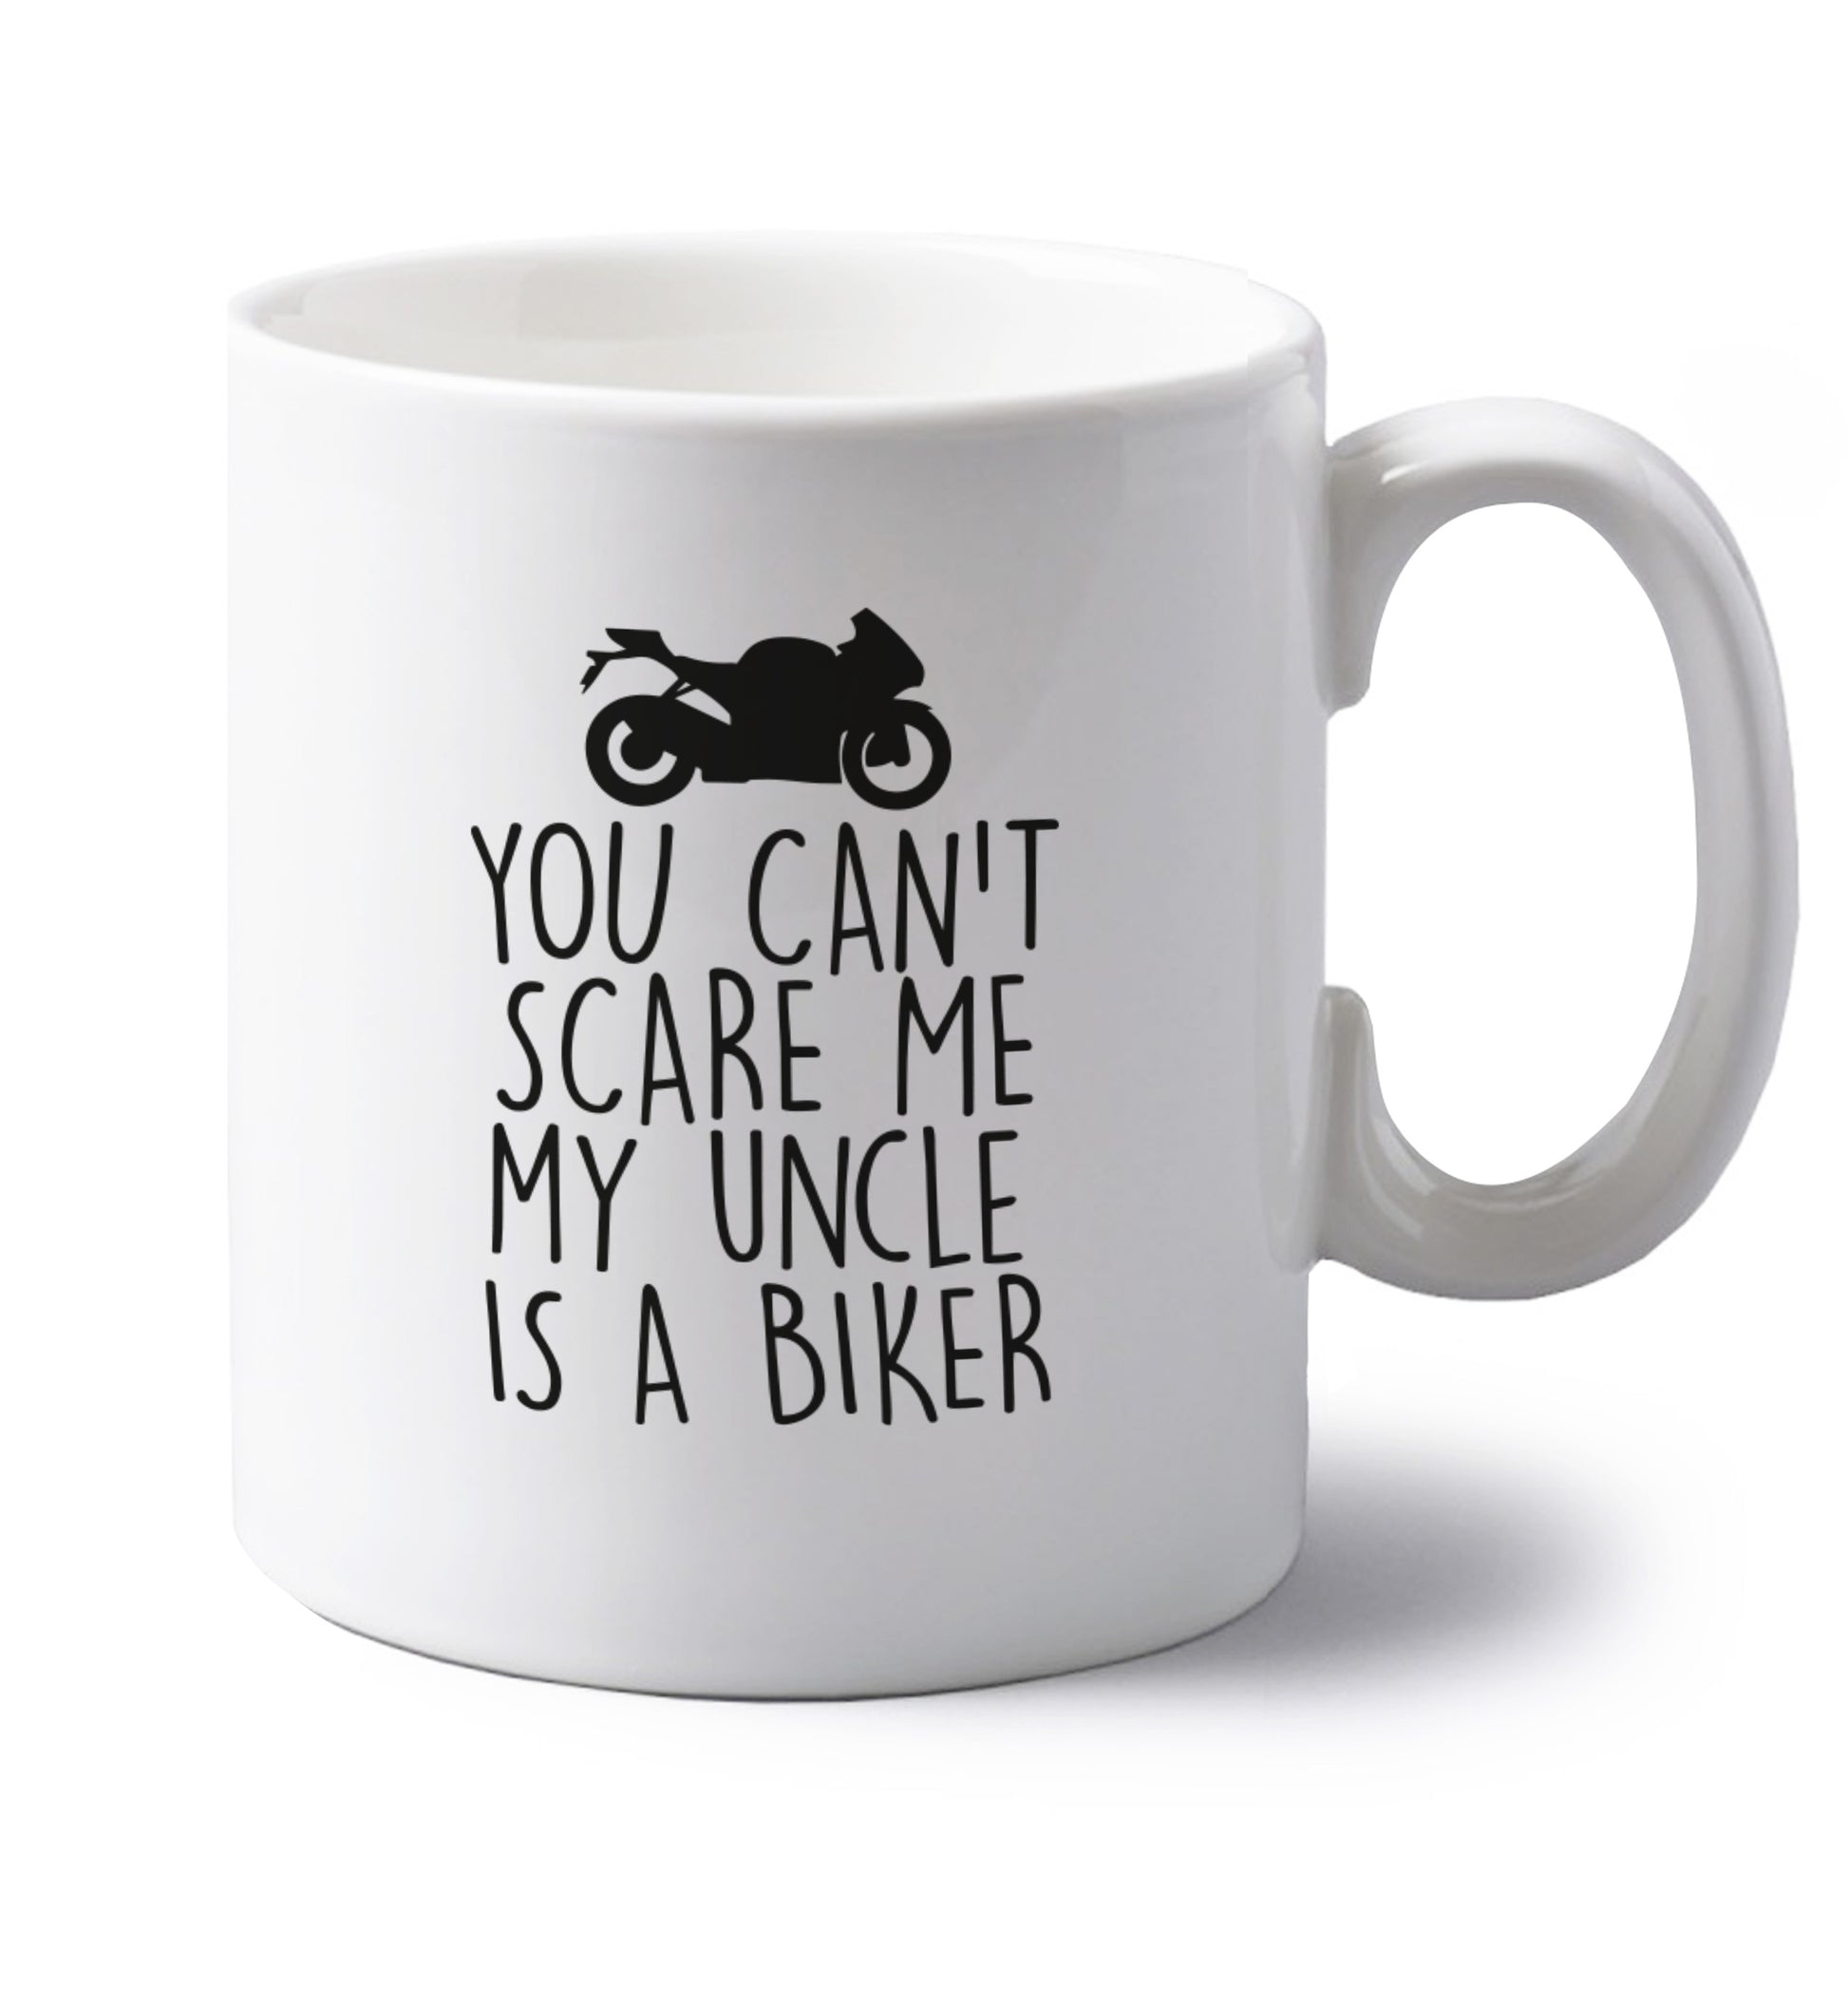 You can't scare me my uncle is a biker left handed white ceramic mug 